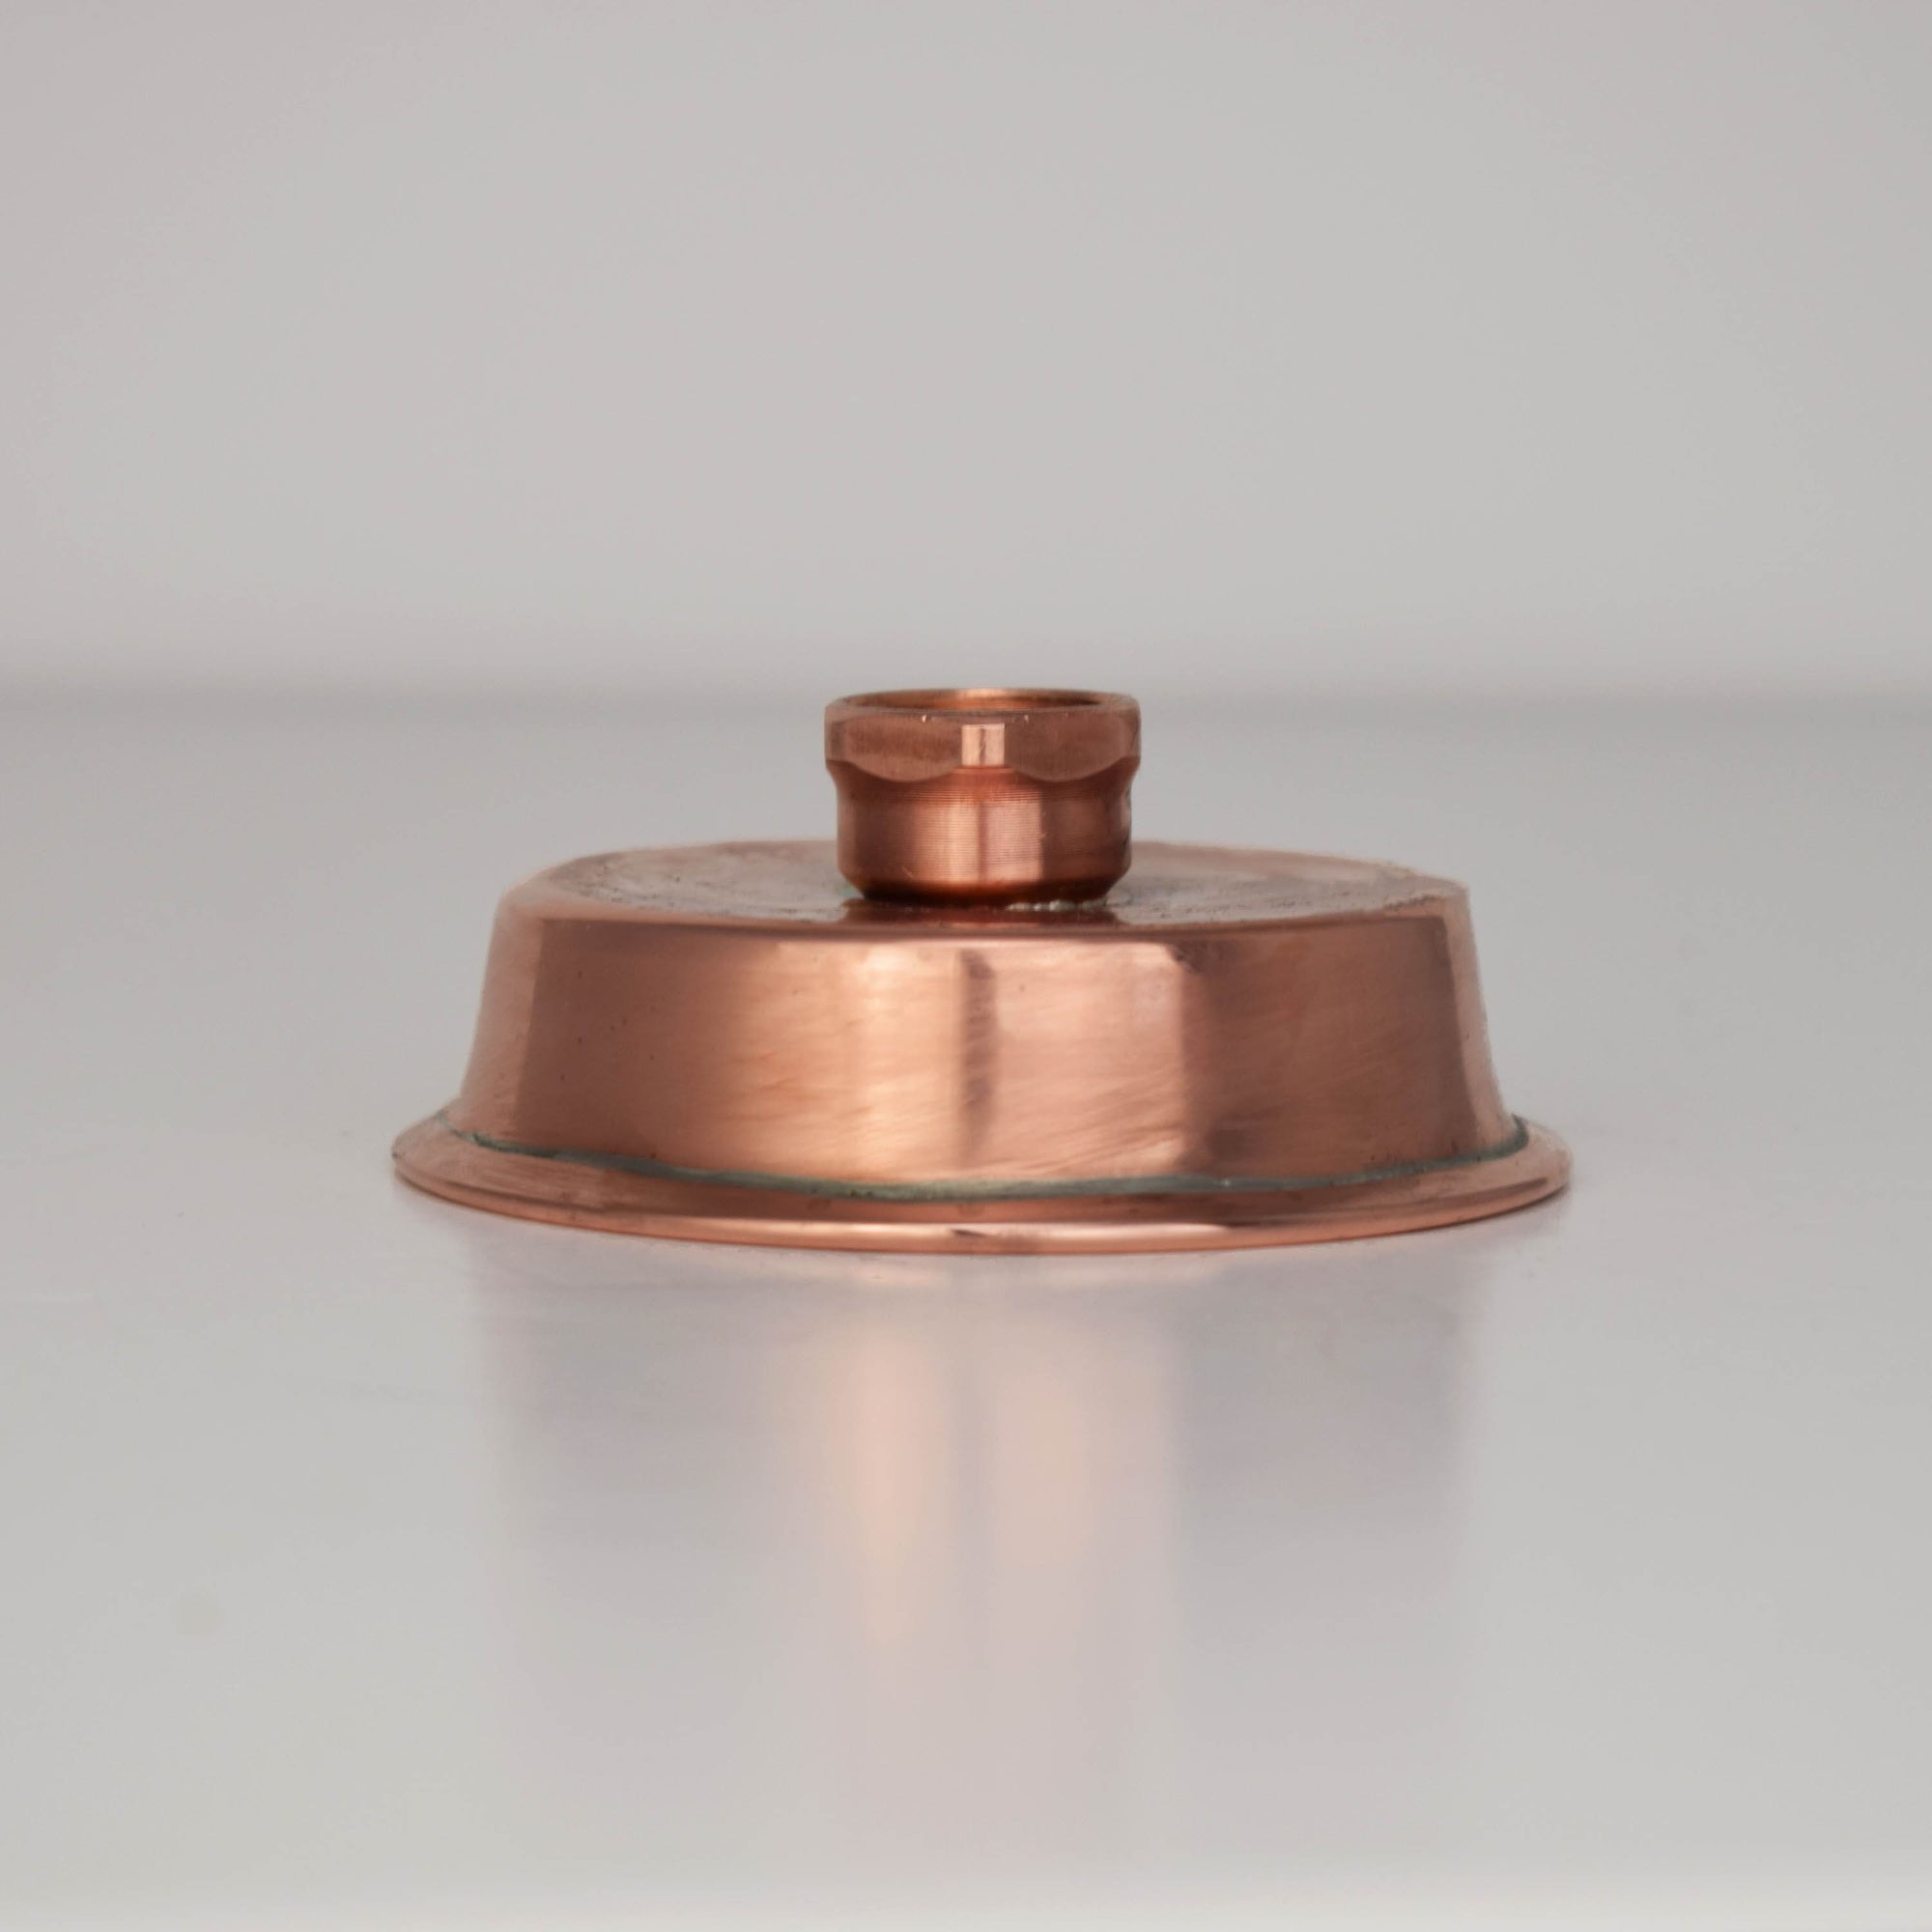 Upgrade your shower routine with this top-of-the-line copper shower head, which features adjustable settings to customize your shower experience.